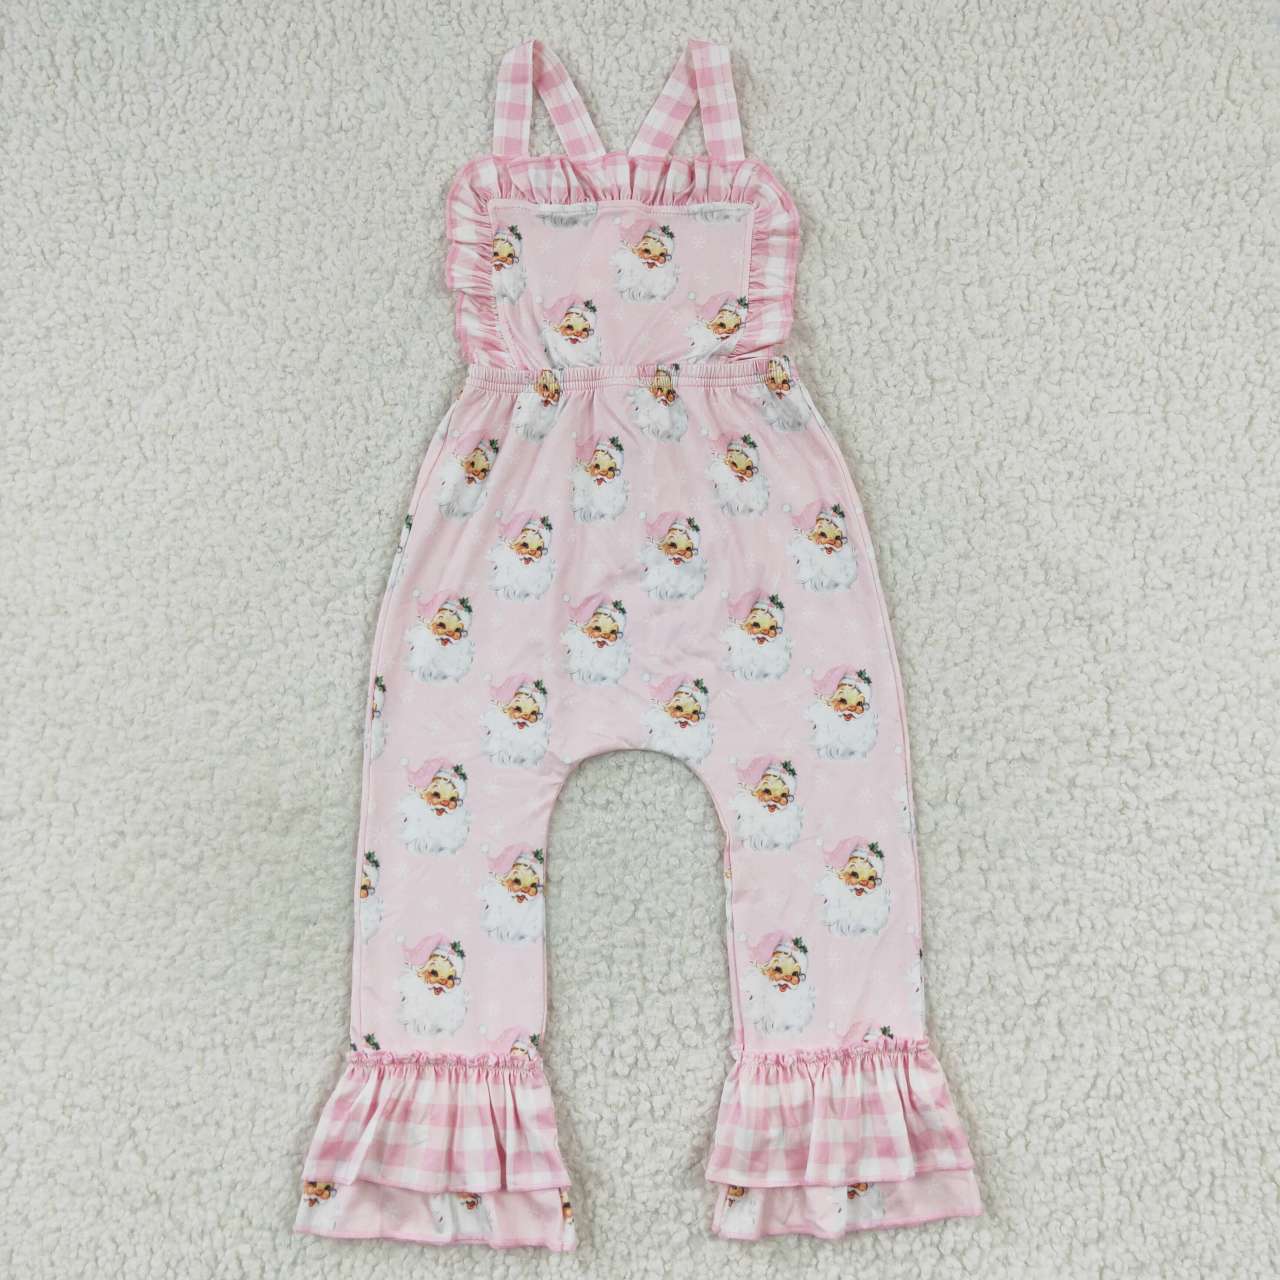 GLP0951 White Cotton Top Pink Santa Print Overall Girls Jumpsuits Christmas Clothes Sets